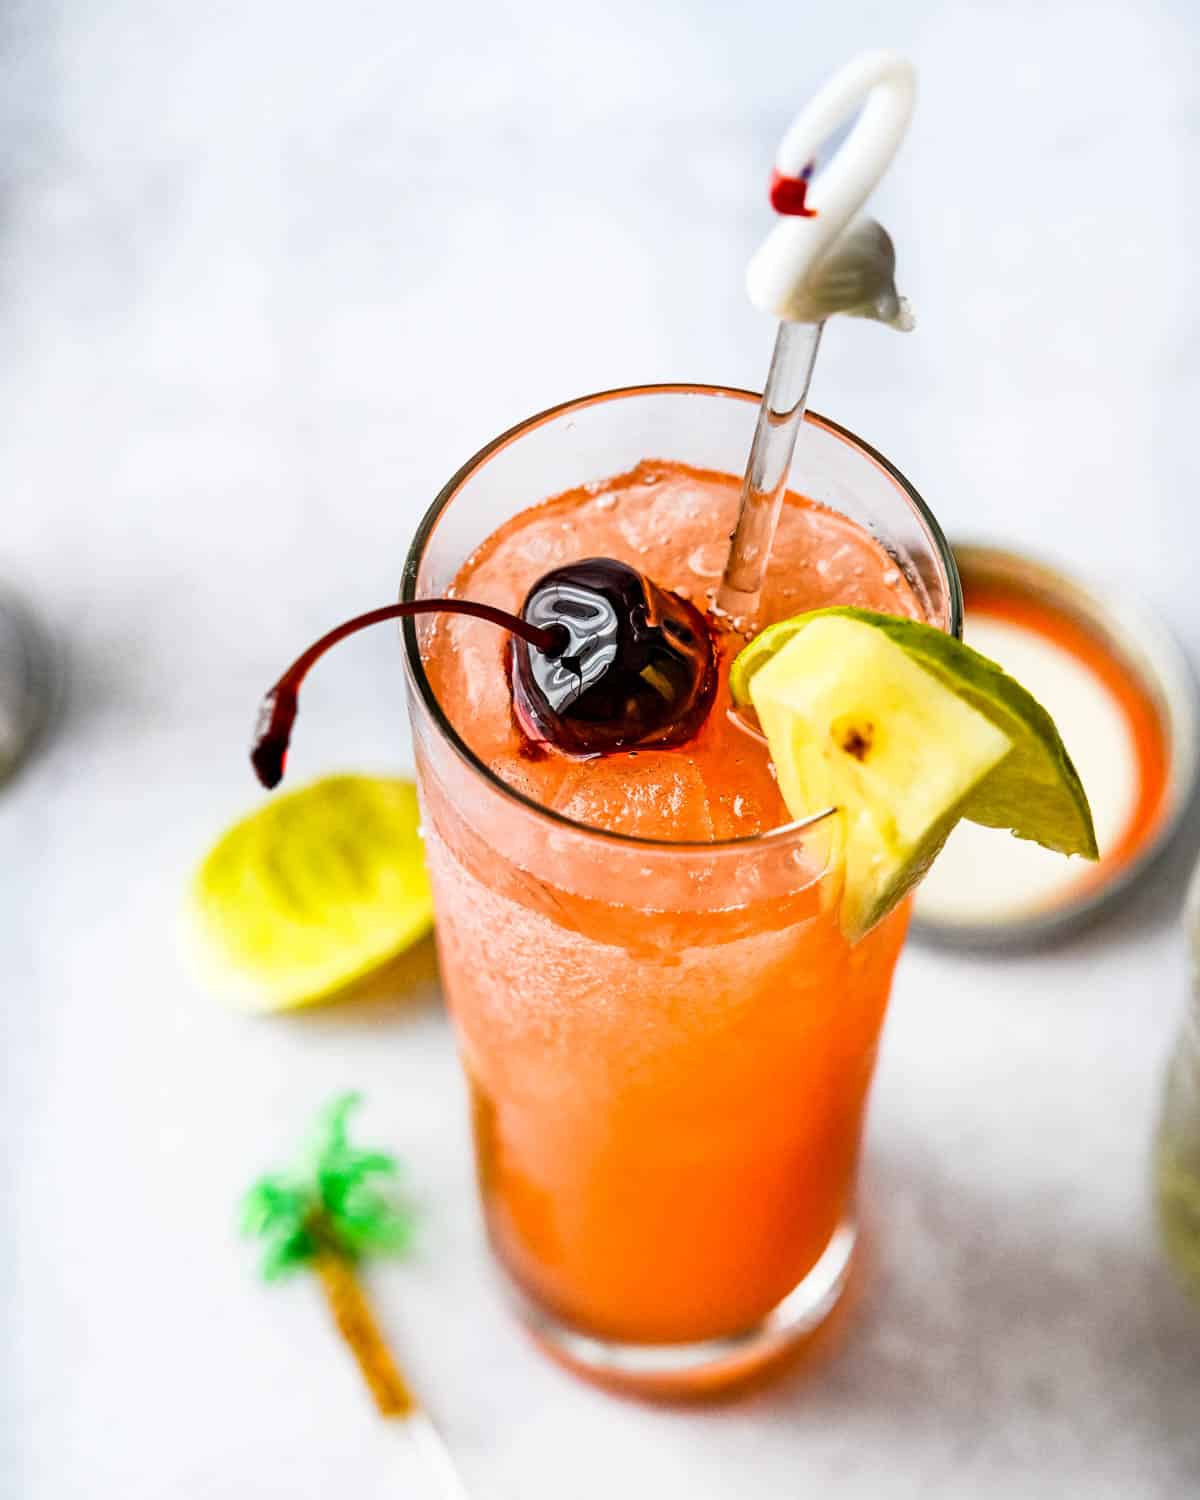 A frosty planters punch with a cherry and pineapple garnish.